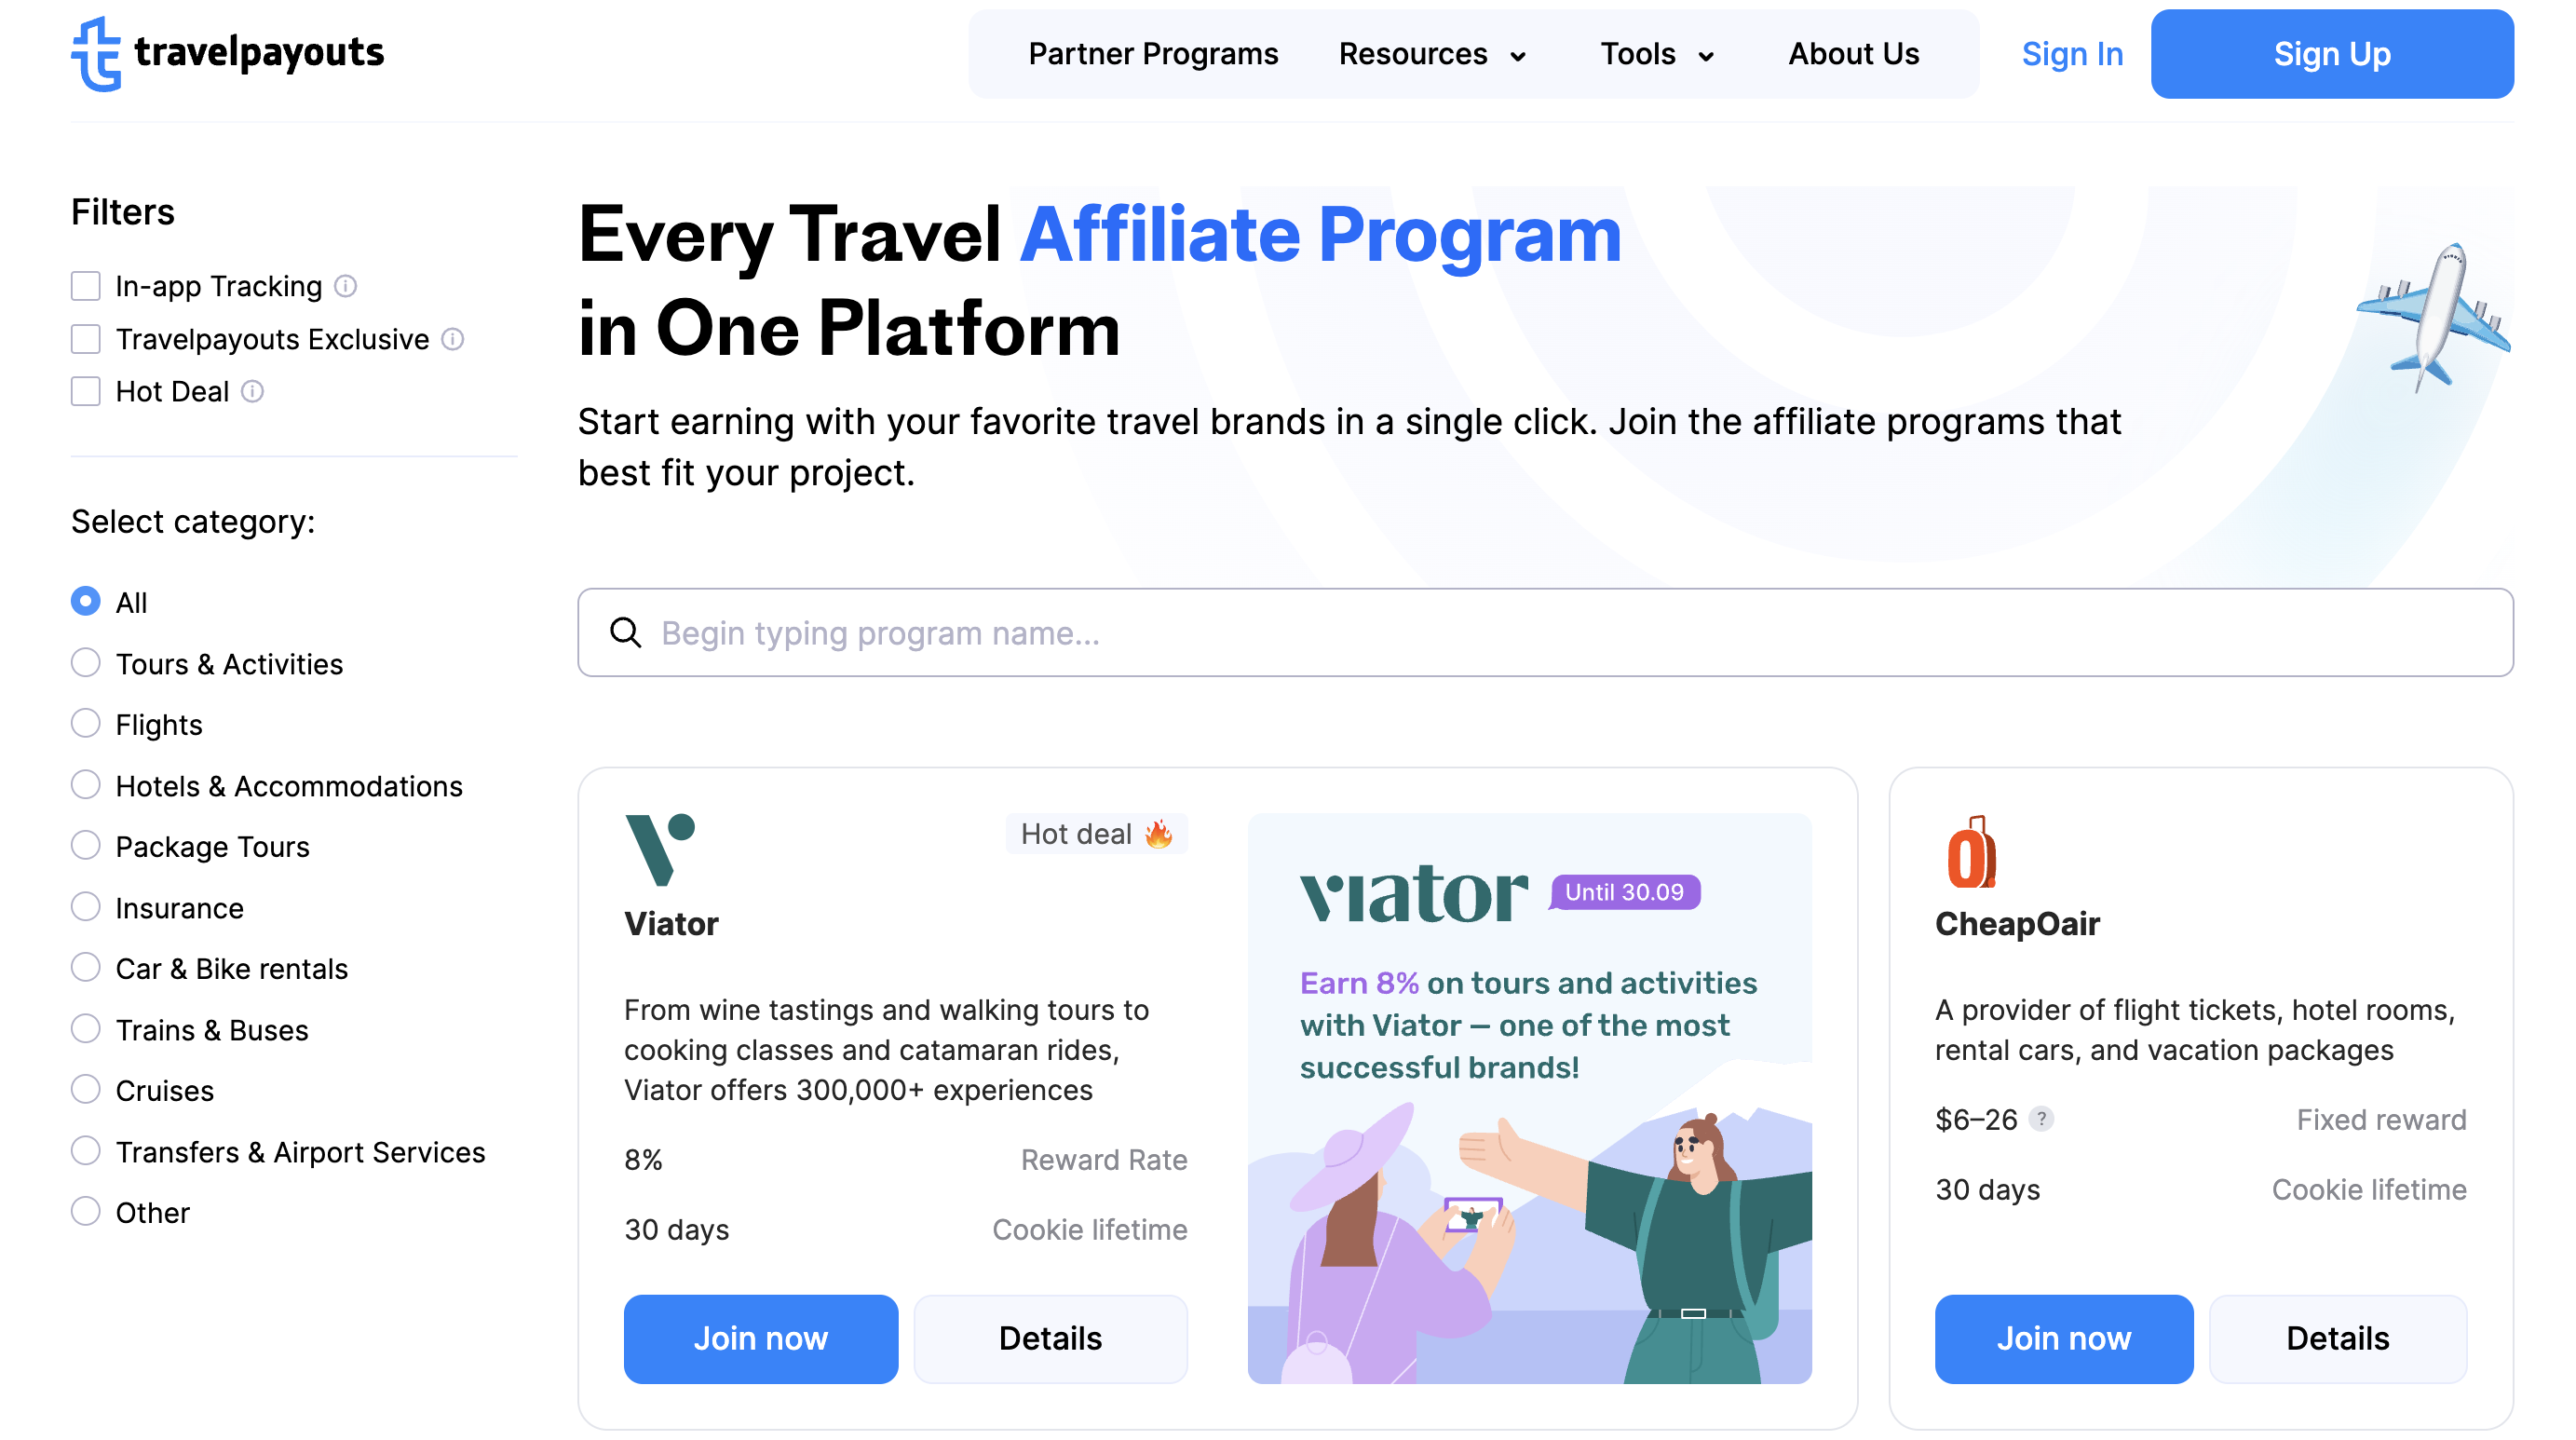 A screenshot of several programs, including Viator and CheapOair, in the Travelpayouts Partnership Platform.